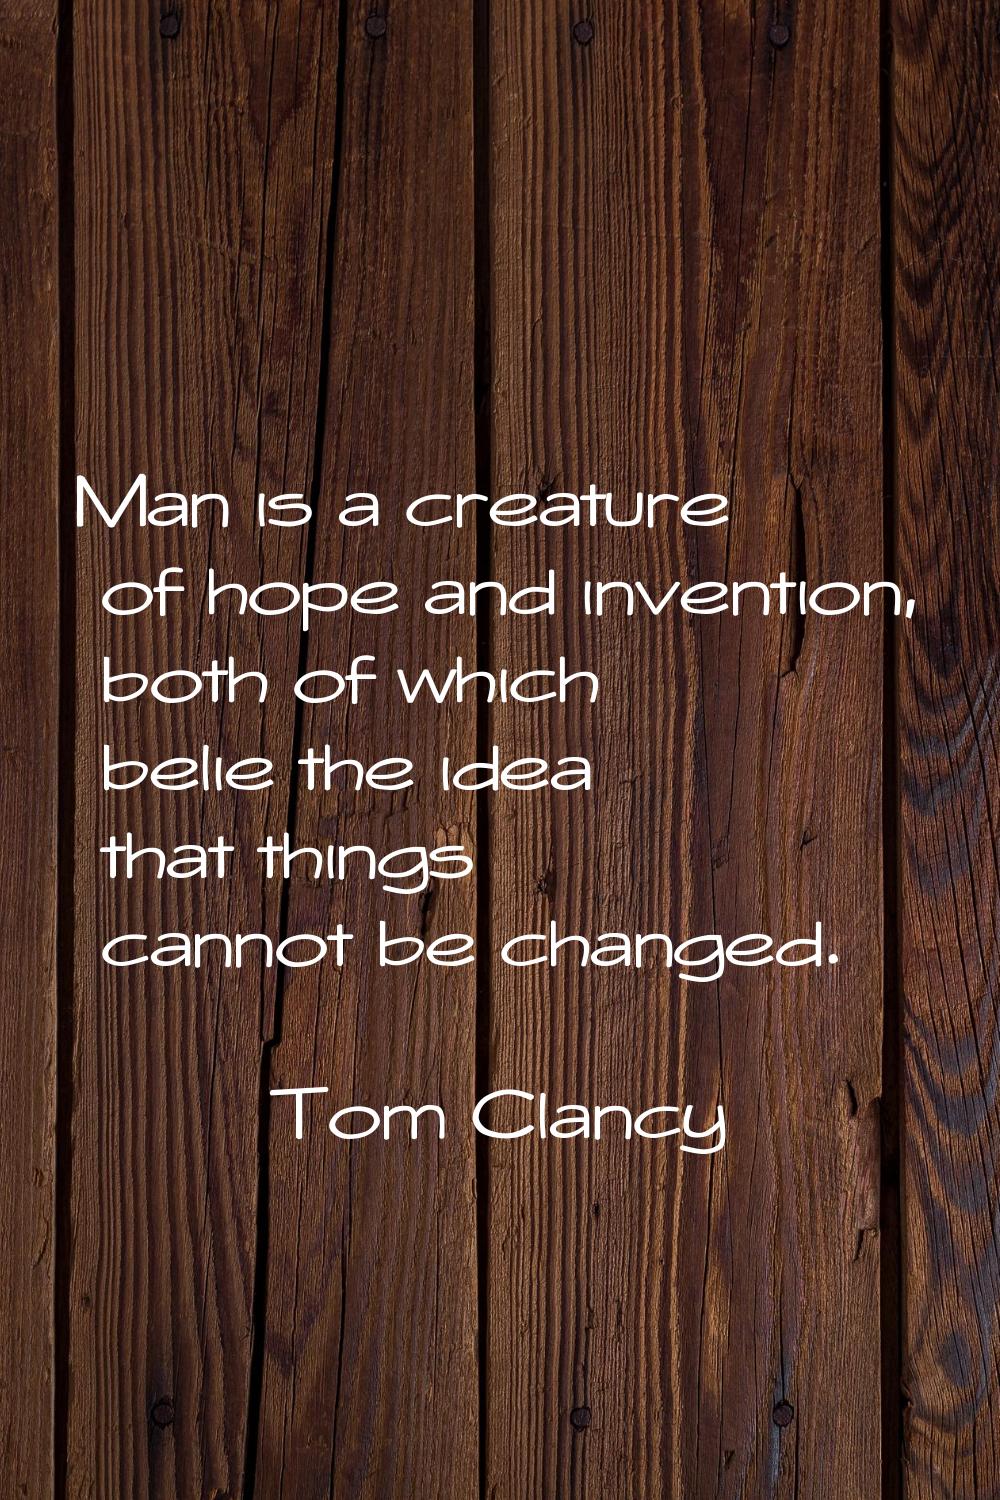 Man is a creature of hope and invention, both of which belie the idea that things cannot be changed